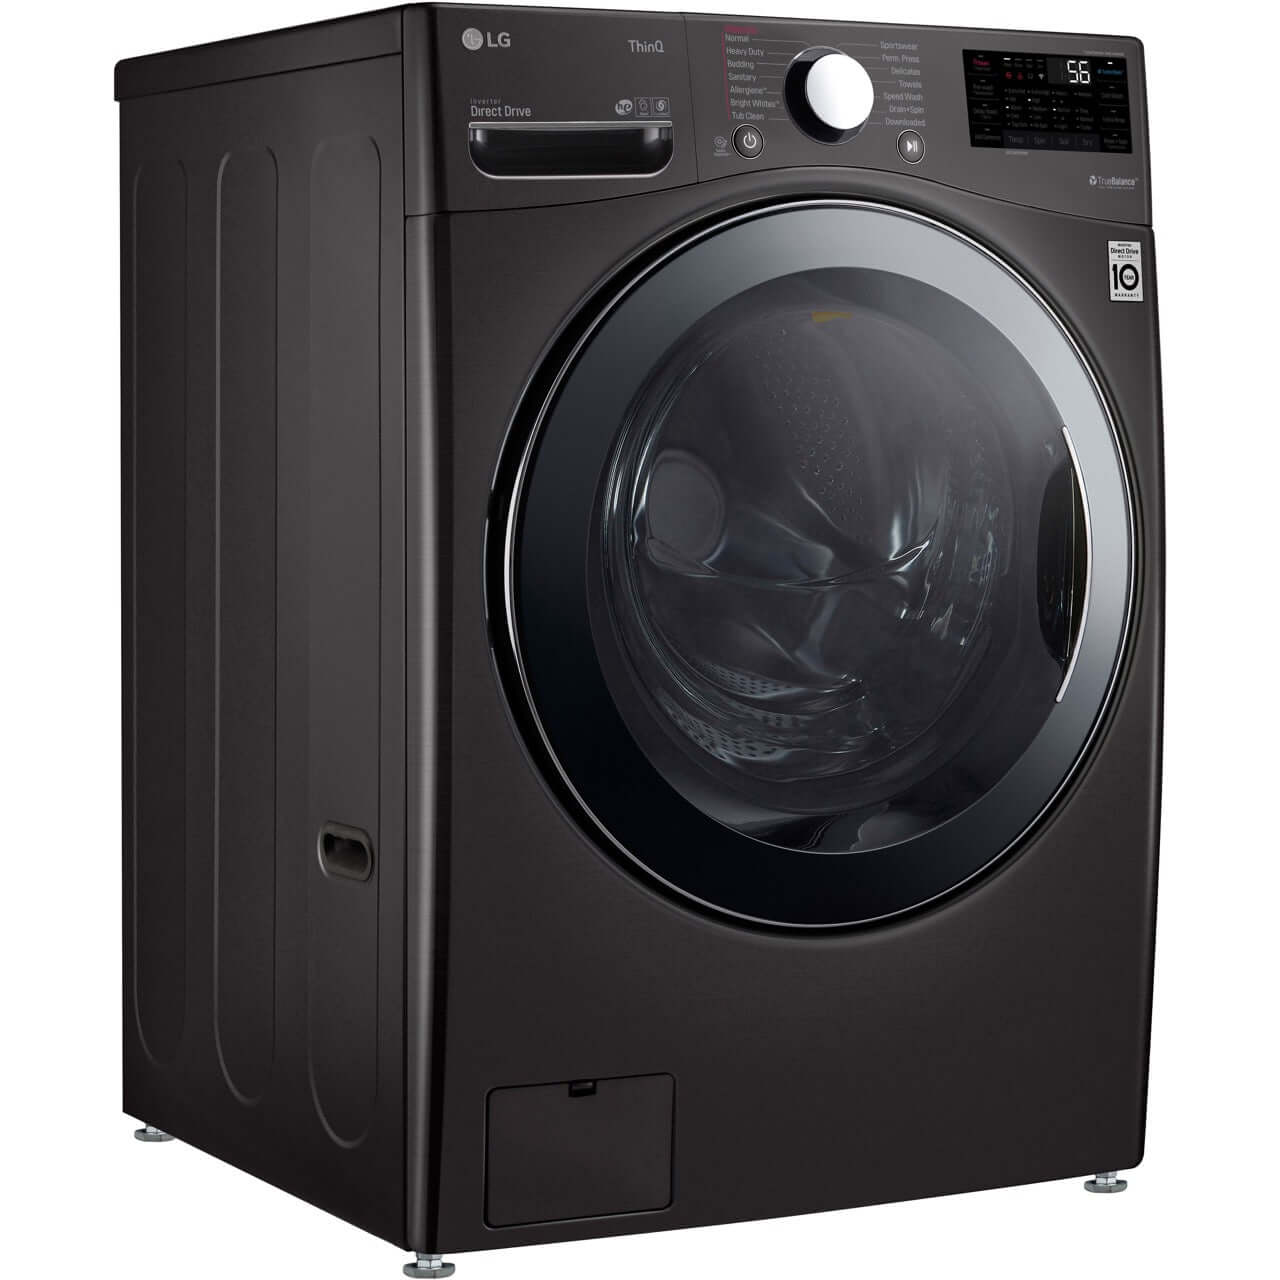 LG 4.5-Cu. Ft. Front Load Washer and Dryer Combo in Black Steel (WM3998HBA)